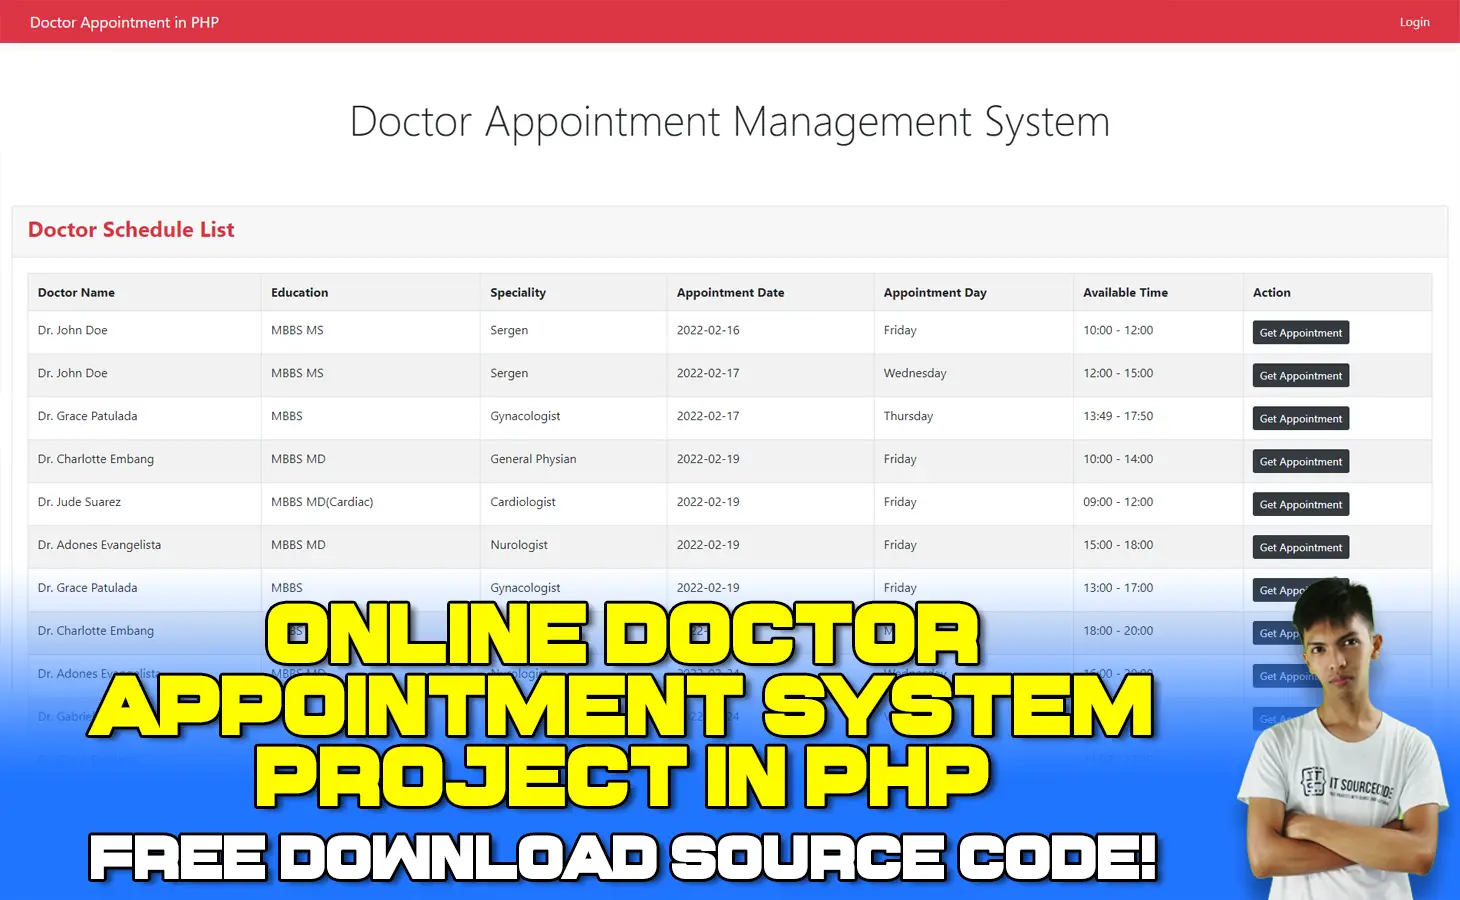 Online Doctor Appointment System Project in PHP Free Download